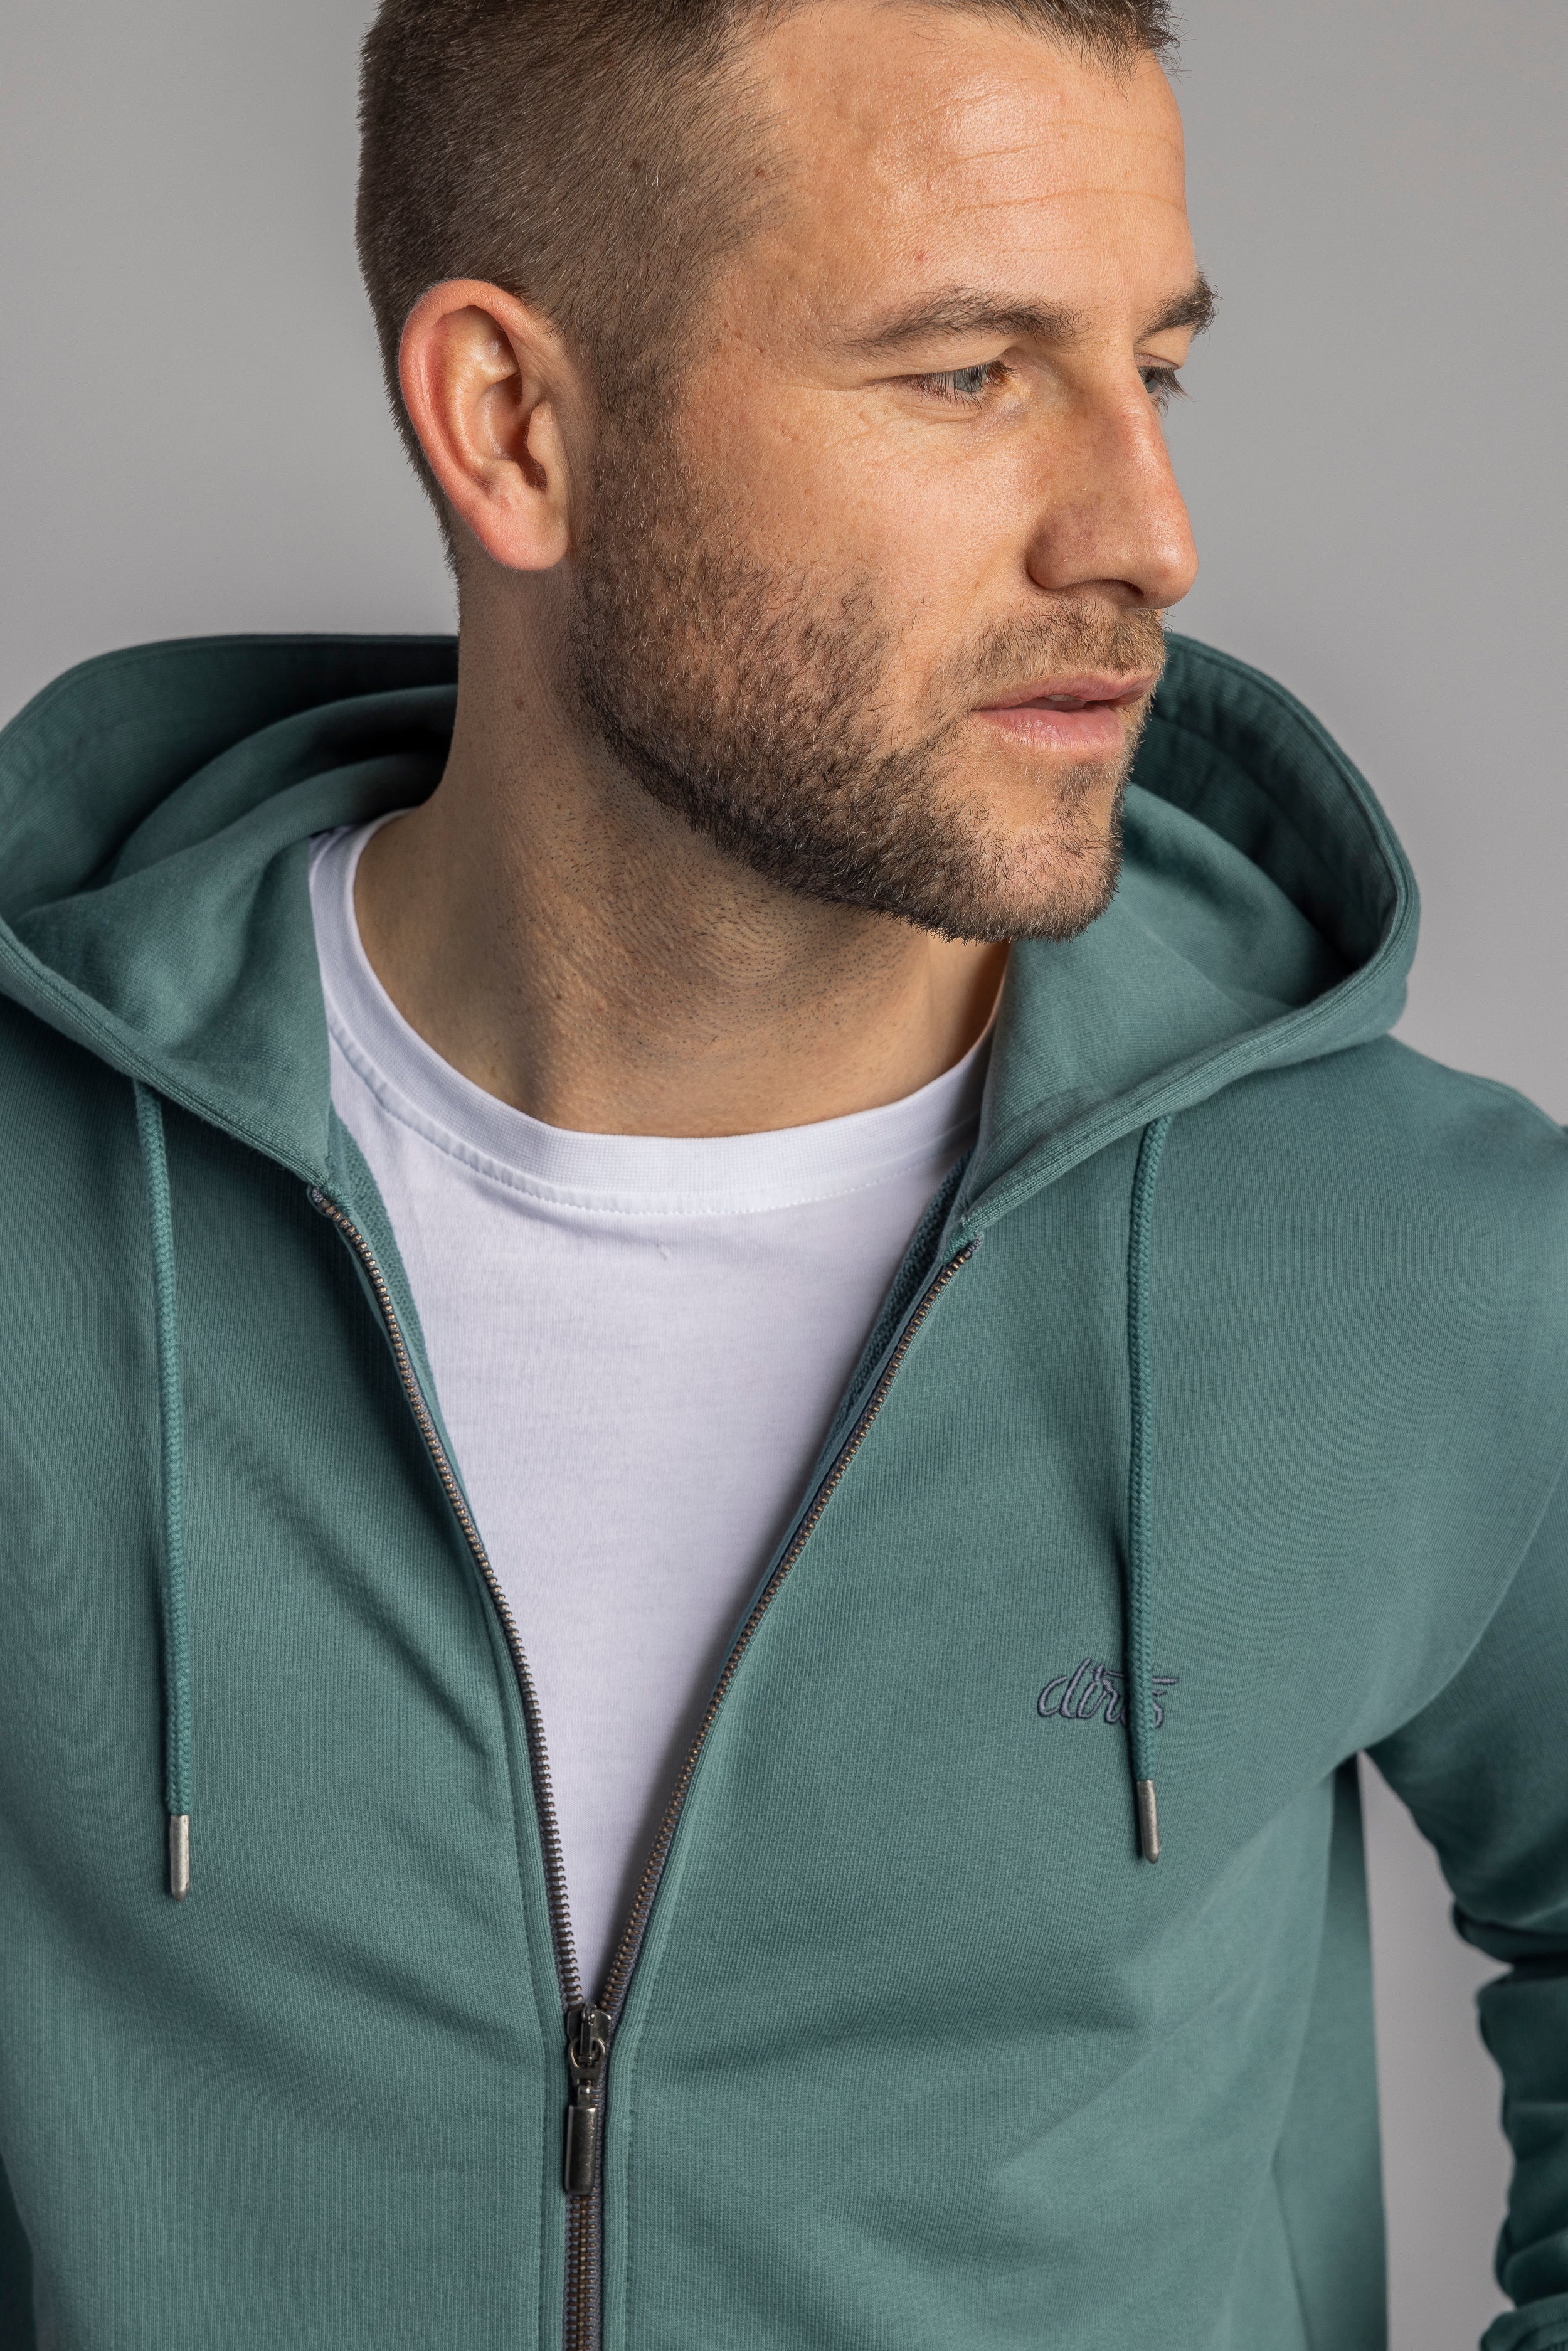 Green zip hoodie made from 100% organic cotton from DIRTS